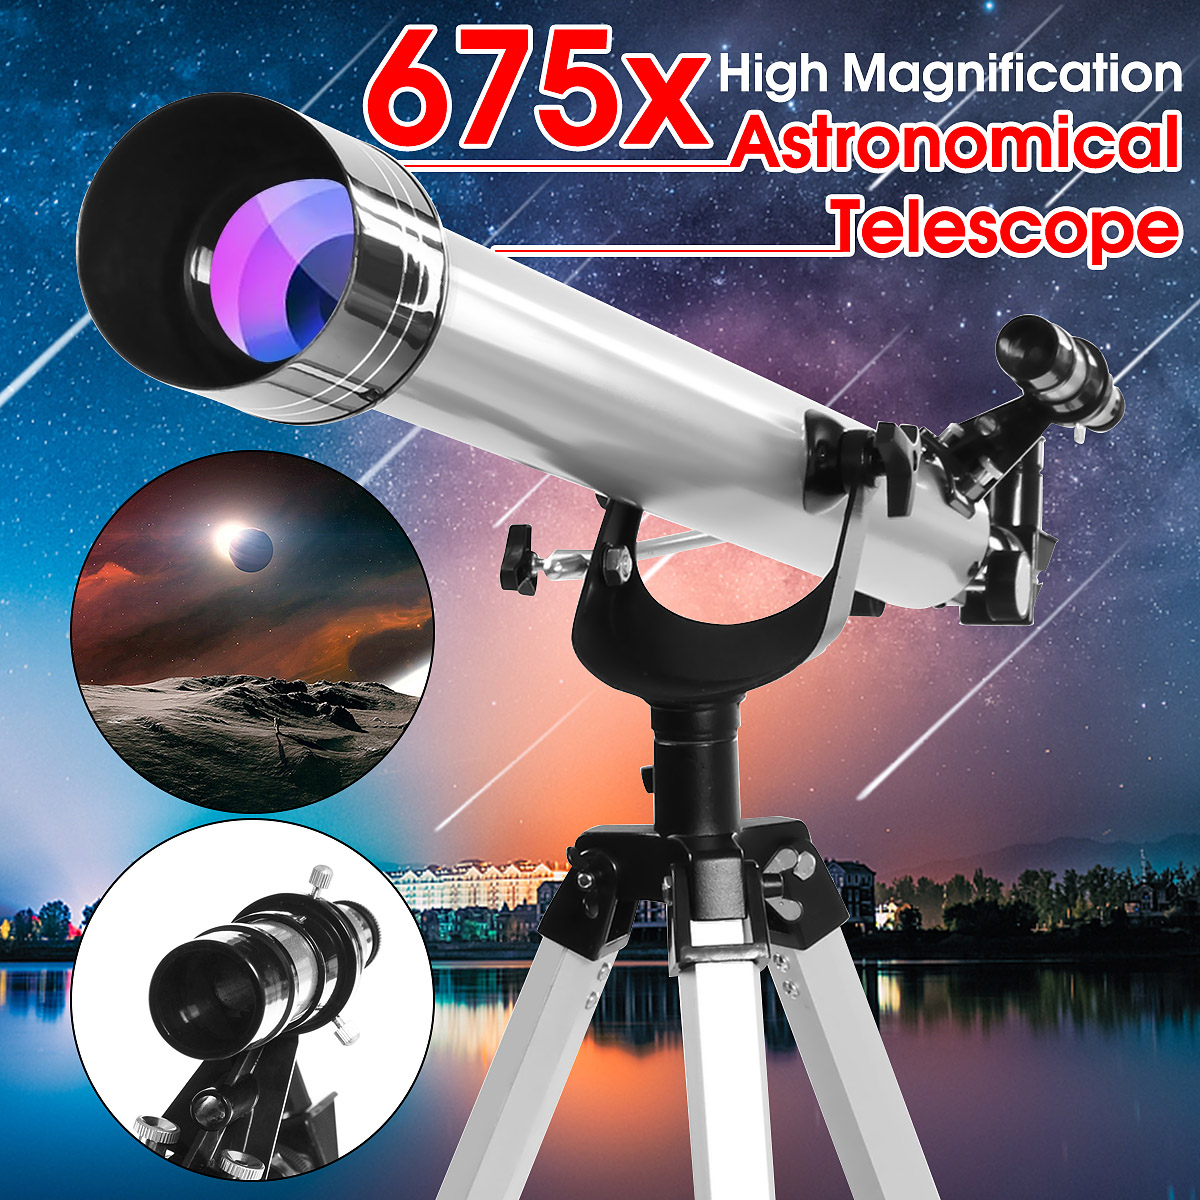 675x High Magnification Astronomical Refractive Zooming Telescope for Space  Celestial Observation | Alexnld.com